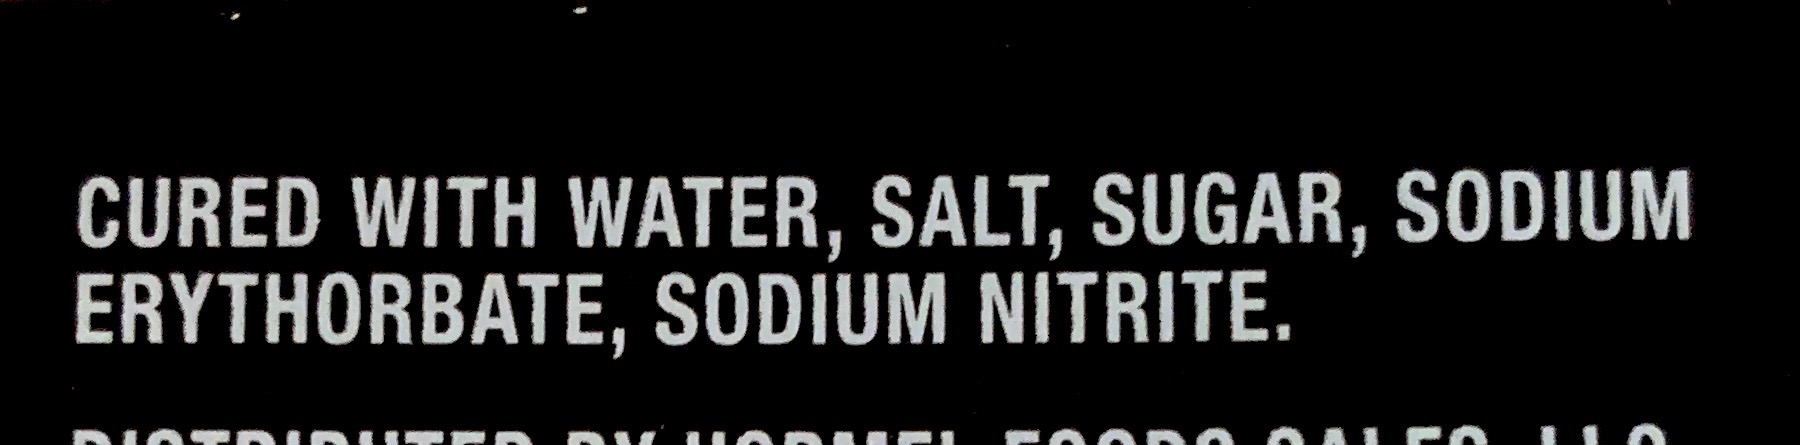 Ingredient list with processed ingredients, including sodium nitrite on it